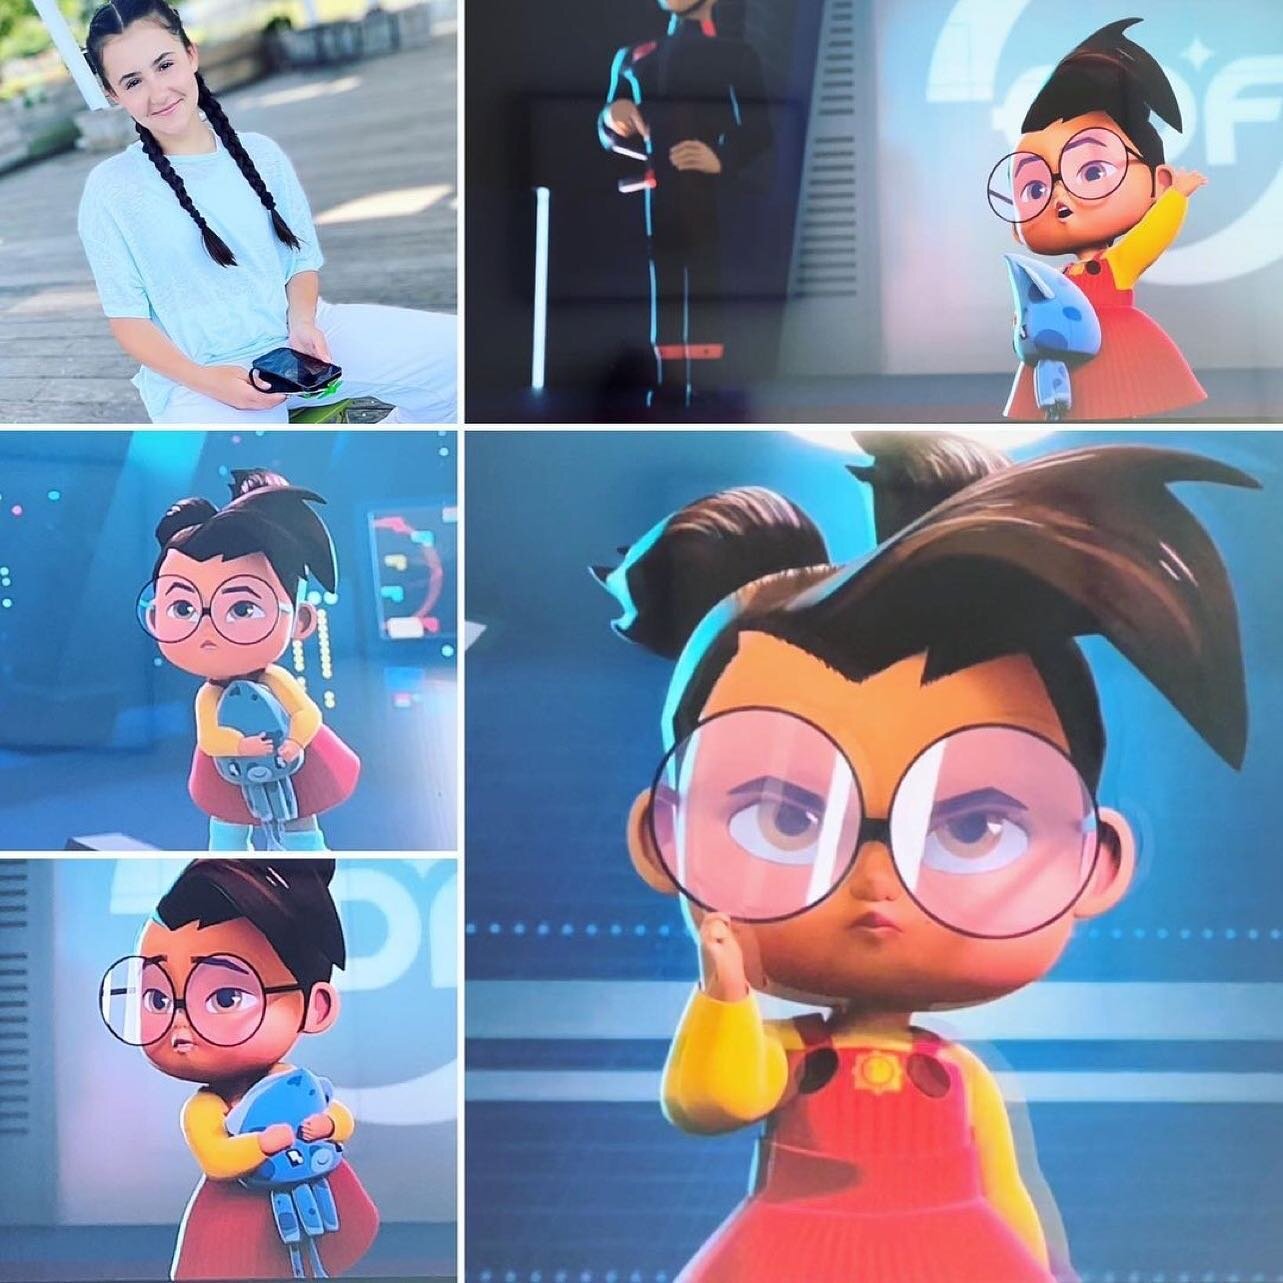 Repost from @evaarielbinder
&bull;
Hi!  Please check out my new animated character &ldquo;Baby Alex&rdquo; on Netflix ! This little girl was so much fun to voice! It&rsquo;s like nothing I have ever played before! Thanks Mark Andrews for giving me a 